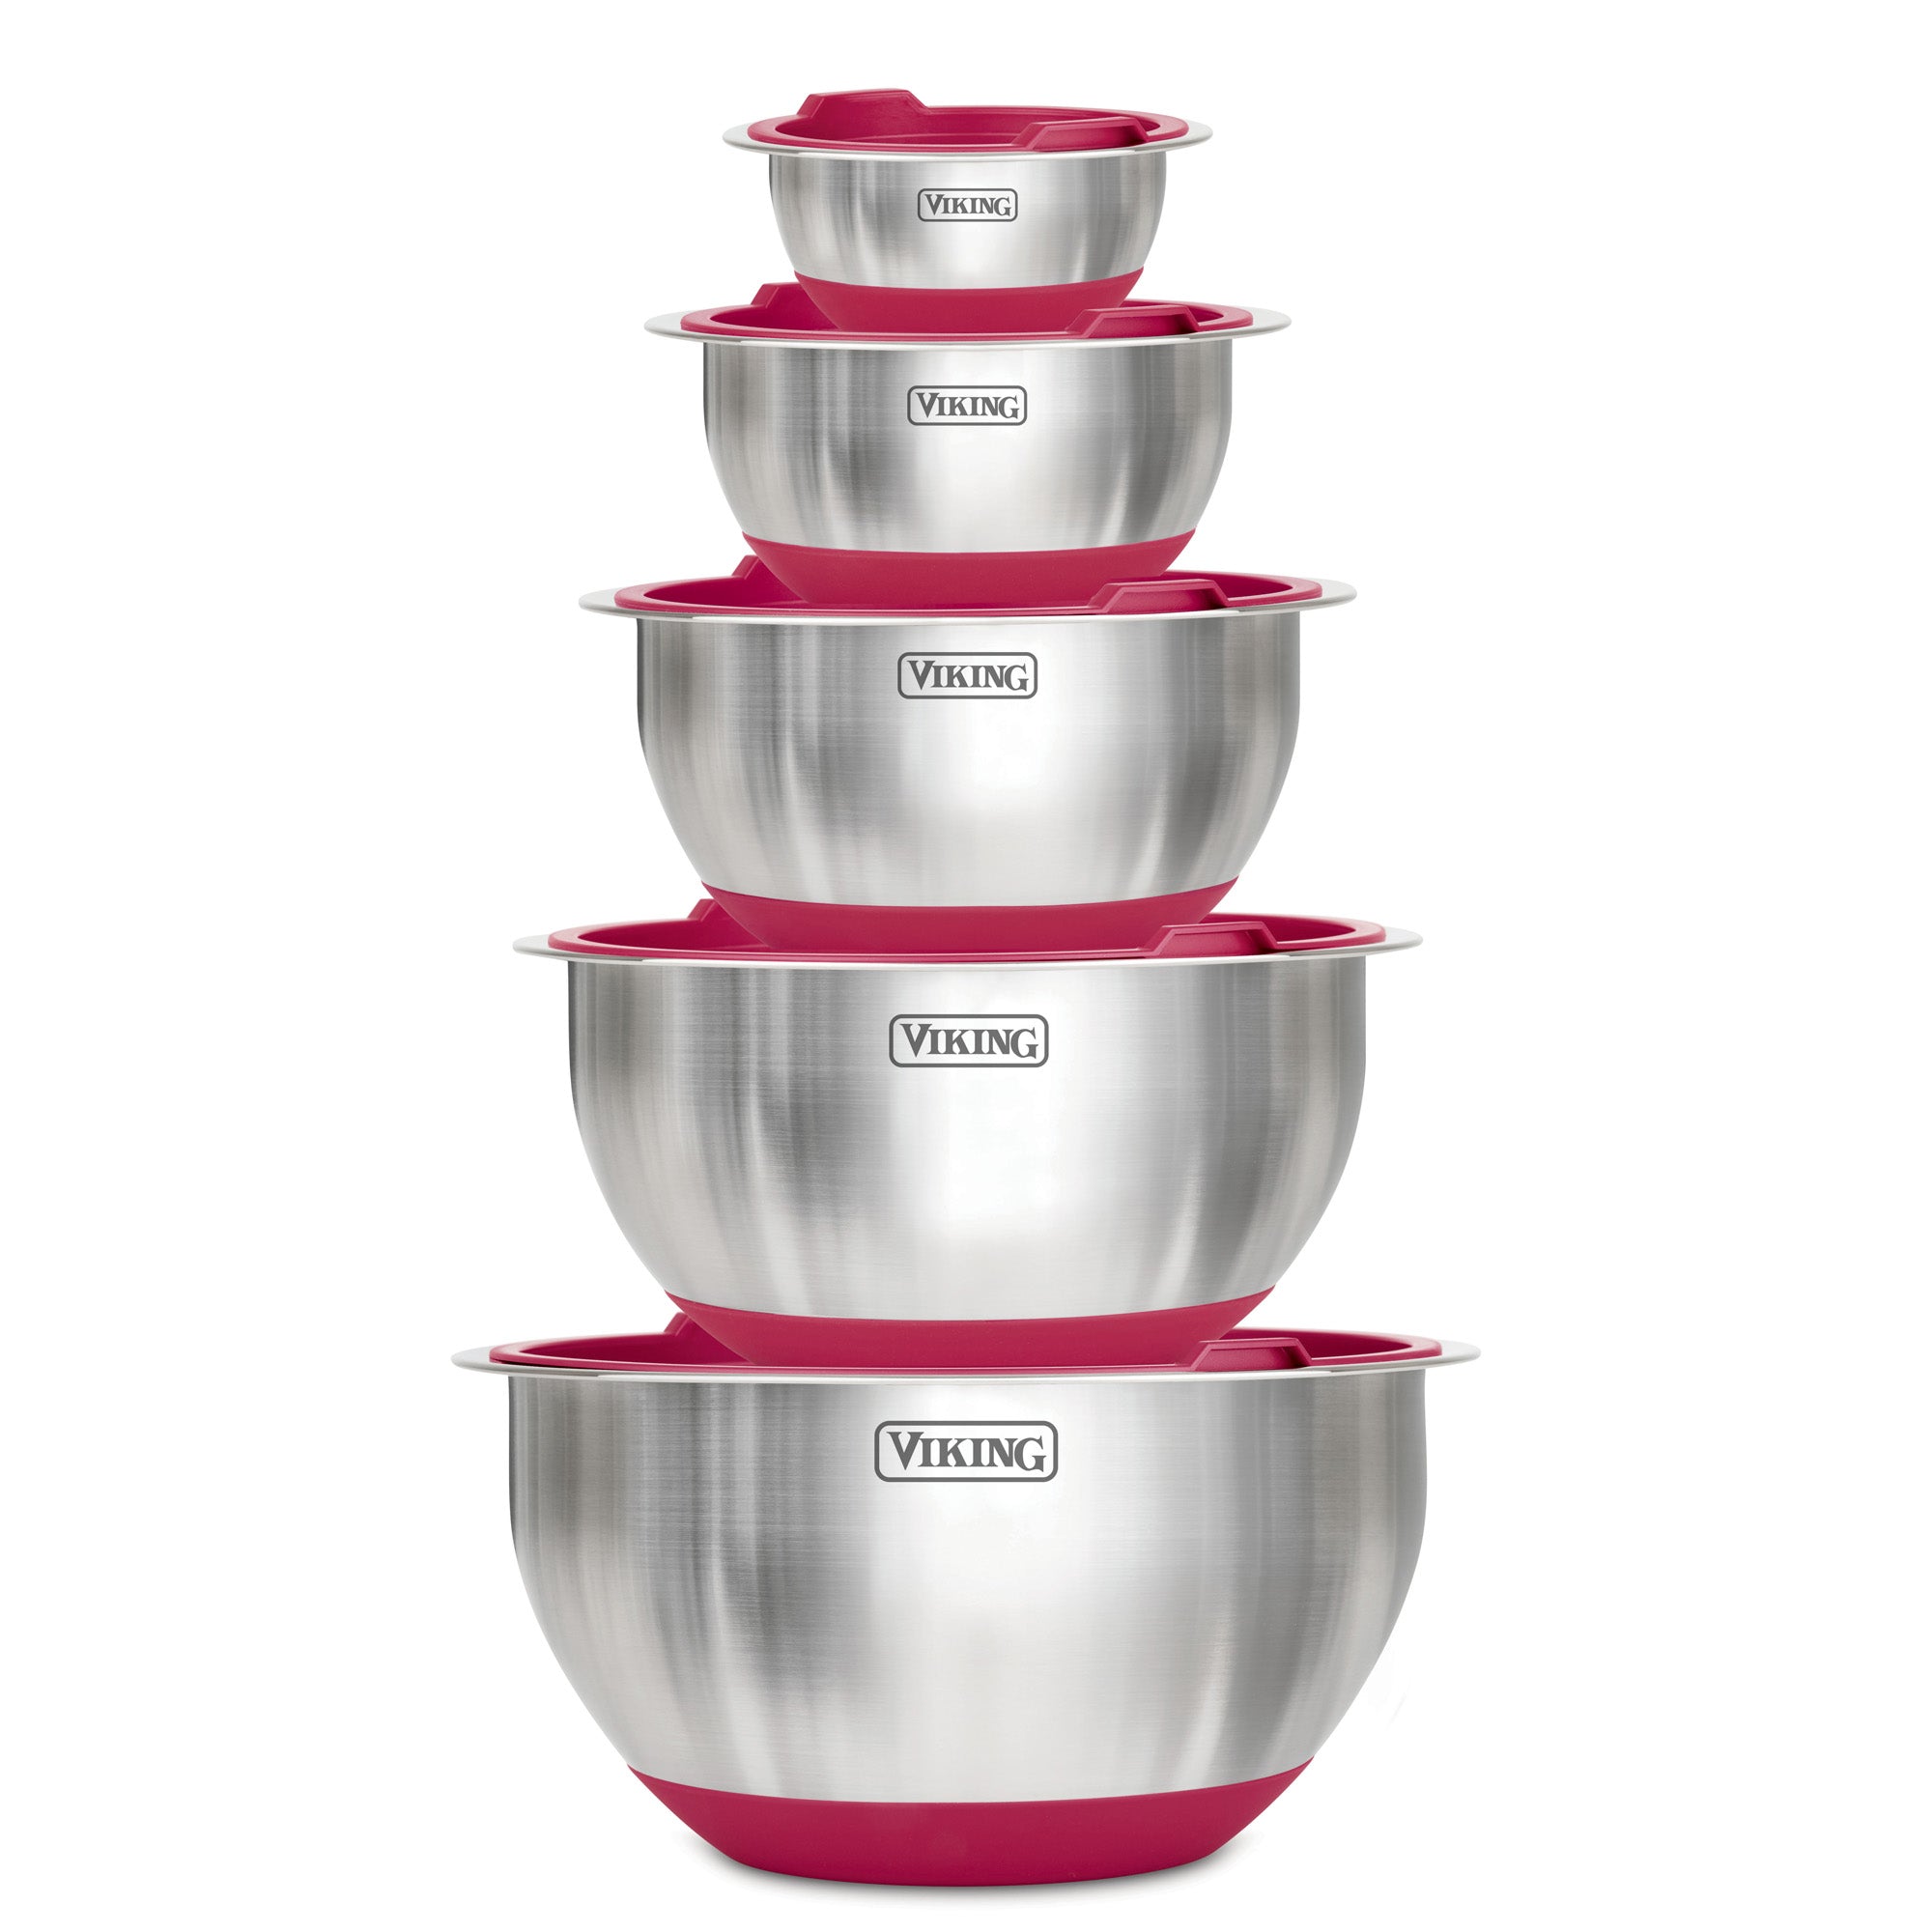 Large Mixing Bowls with Lids Set, 6 PCS Stainless Steel Mixing